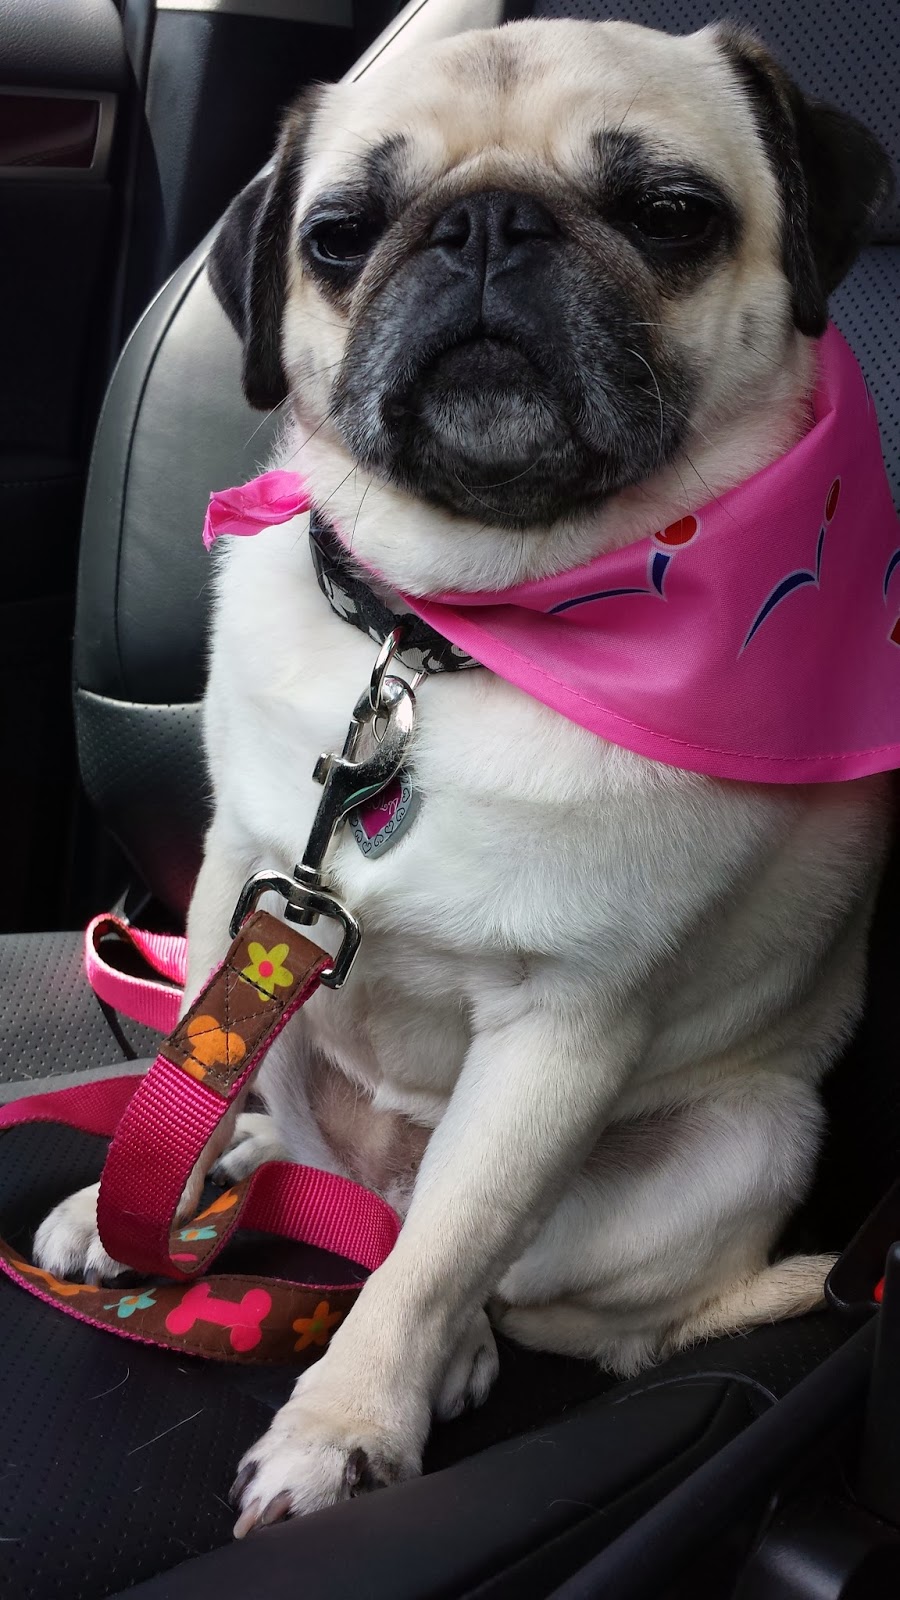 Miss Lola relaxing in the car